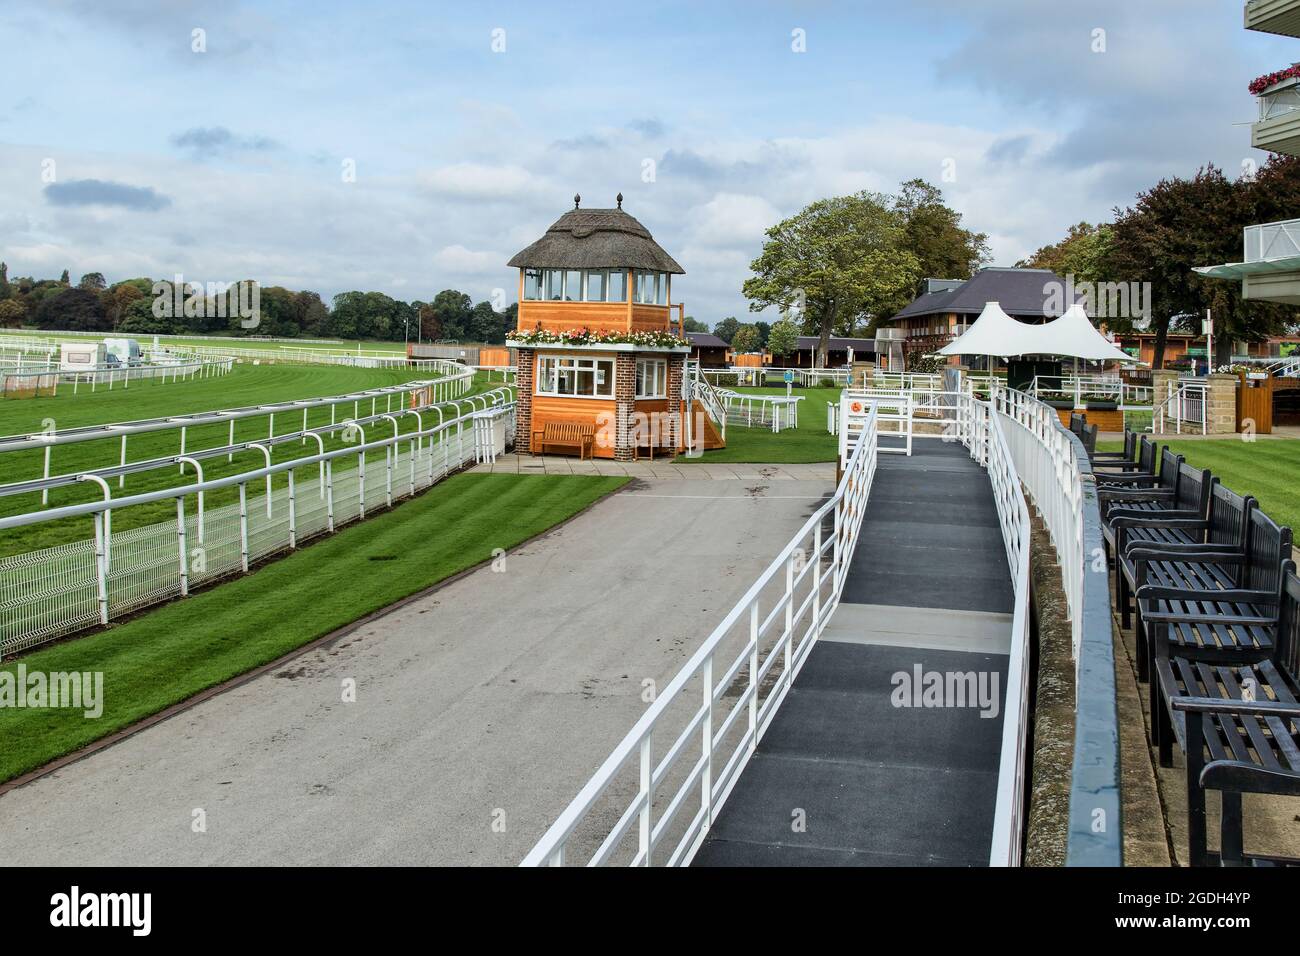 The York Racecourse's wooden tower, located just across from the Melrose Grandstand, Knavesmire Road, York, North Yorkshire, England, UK. Stock Photo